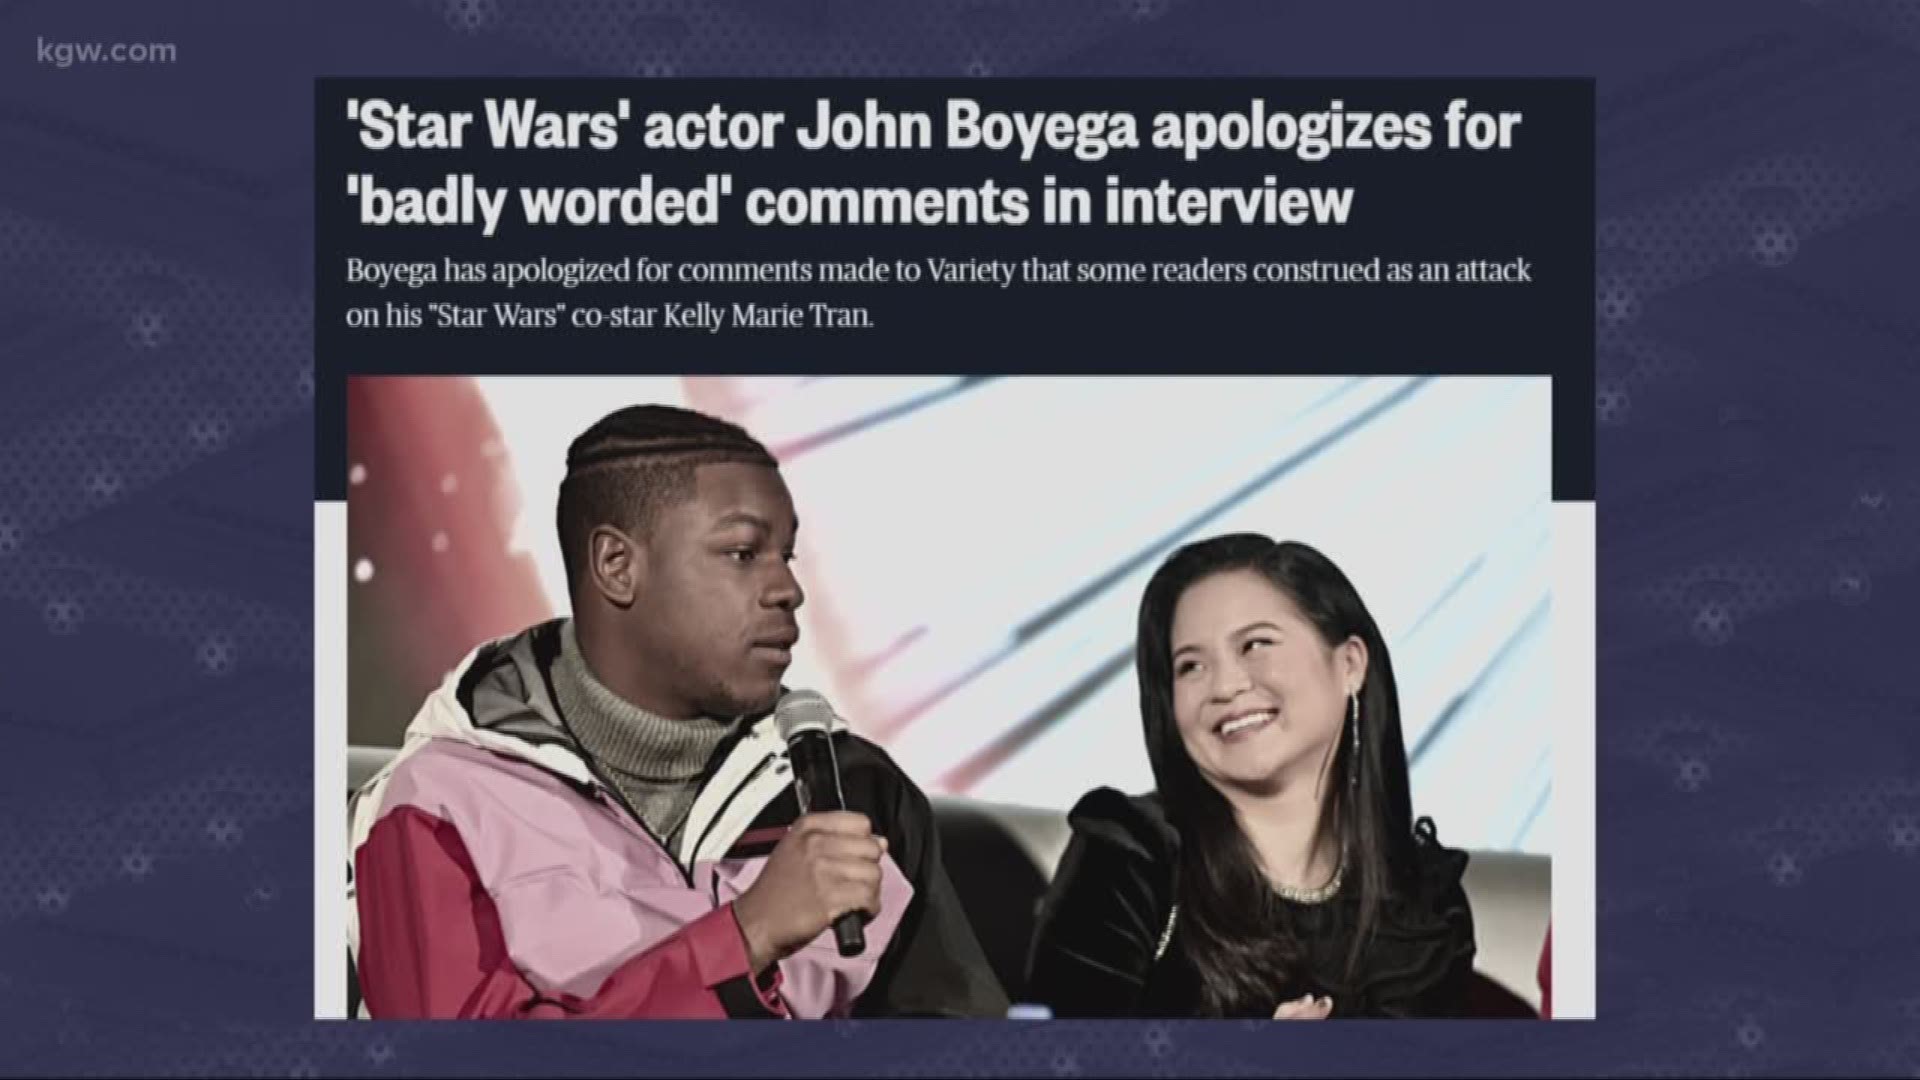 The Star Wars fandom is experiencing some discourse around The Rise of Skywalker and simultaneously one of their stars, John Boyega. We should all just be chill.